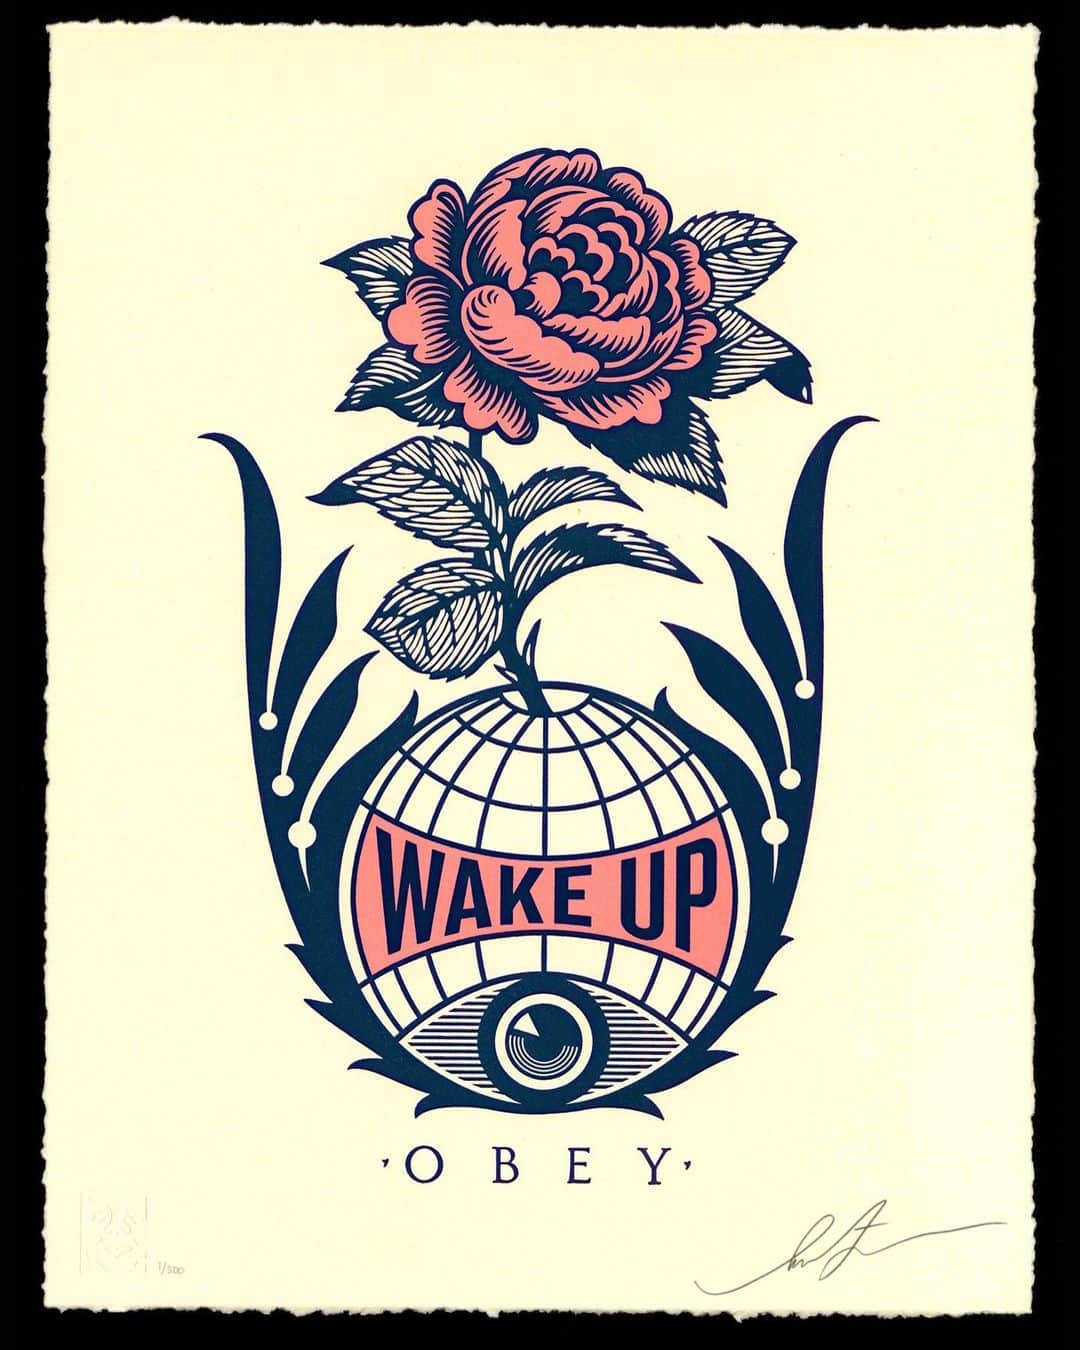 Shepard Faireyさんのインスタグラム写真 - (Shepard FaireyInstagram)「WAKE UP EARTH LETTERPRESS AVAILABLE THURSDAY, AUGUST 6TH!⁠⠀ ⠀⠀⠀⠀⠀⠀⠀⠀⠀⁣⁠⠀ This Wake Up Earth letterpress is an urge for us all to be alert, conscious, and analytical. Disinformation, division, and apathy have led to the weakening of pillars of our democracy, an ineffective response to Covid-19, and a lack of meaningful action on environmental destruction and climate change. We accomplish amazing things when we unite and focus on constructive goals, planting seeds, and nurturing them together until they bloom. There are many crucial things going on that demand us to wake up, mobilize, and live with our eyes and minds open! This print applies to many things, but I’ve chosen to donate proceeds to @NRDC_org (Natural Resources Defense Council) to support their work toward legislation that protects the environment for all of our futures. Thanks for caring!⁠⠀ By the way, this letterpress was printed by Aardvark Letterpress (@aardvarkletterpress) with whom I just completed a special letterpress print to commemorate their 50th anniversary as a family-owned LA business… more info about that coming soon!⁠⠀ -Shepard⁠⠀ ⠀⠀⠀⠀⠀⠀⠀⠀⠀⁣⁠⠀ Wake Up Earth. 10 x 13 inches. Letterpress on cream cotton paper with hand-deckled edges. Signed by Shepard Fairey. Numbered edition of 500. $65. Proceeds go to @nrdc_org. Obey publishing chop in lower left corner. Available on Thursday, August 6th @ 10 AM PDT at https://store.obeygiant.com/collections/prints. Max order: 1 per customer/household. International customers are responsible for import fees due upon delivery.⁣ Orders may be delayed due to COVID19. ALL SALES FINAL.」8月5日 2時11分 - obeygiant